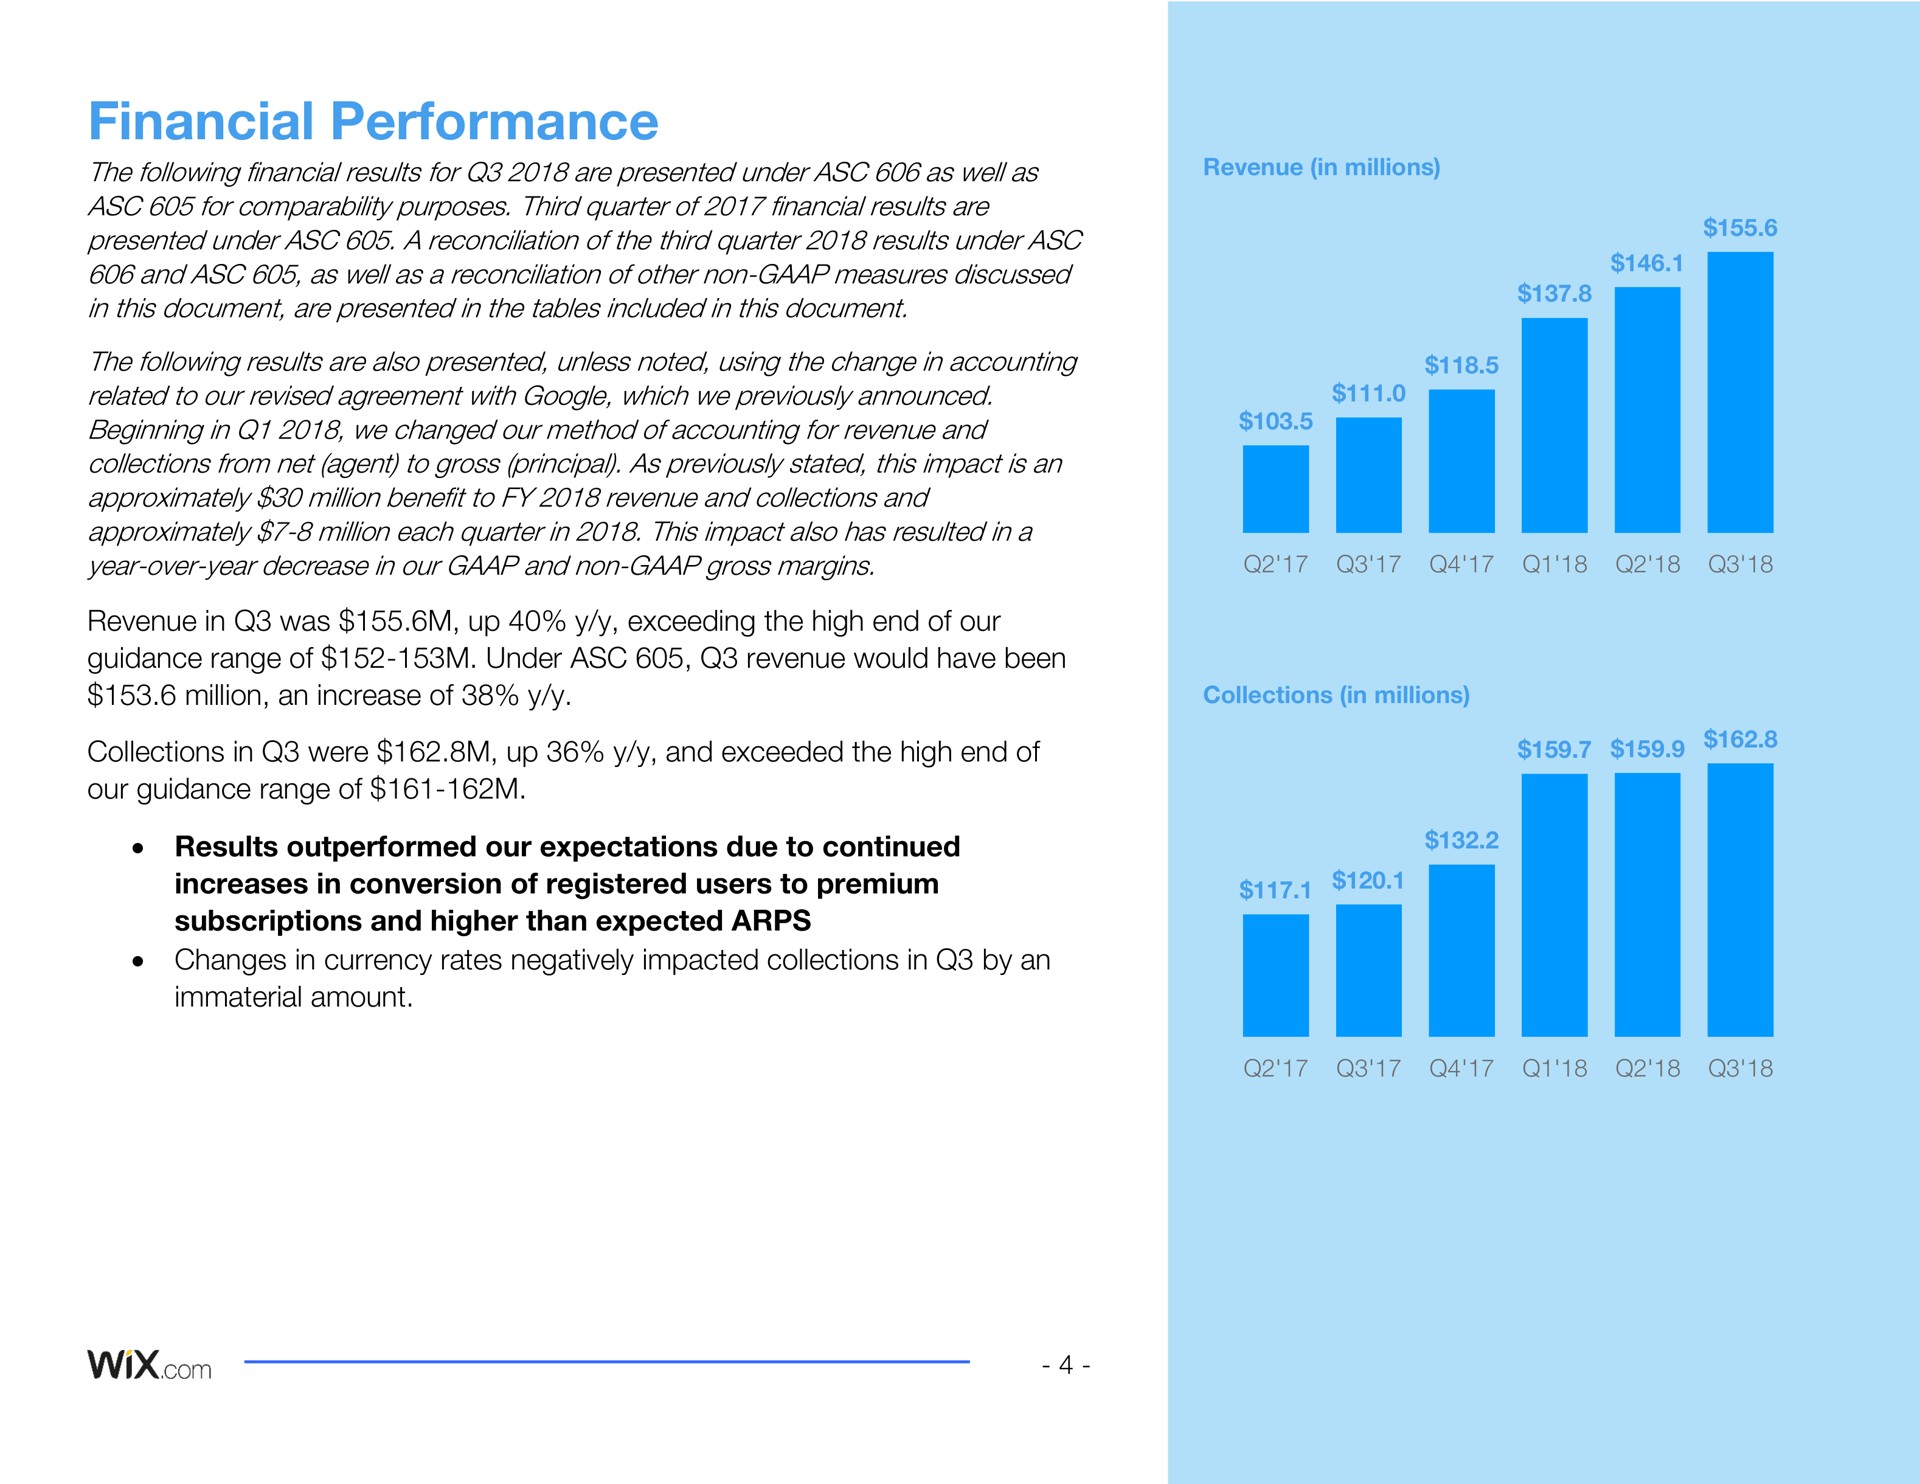 financial performance revenue in was up exceeding the high end of our guidance range of under revenue would have been million an increase of collections in were up and exceeded the high end of our guidance range of results outperformed our expectations due to continued increases in conversion of registered users to premium subscriptions and higher than expected changes in currency rates negatively impacted collections in by an immaterial amount i | Wix